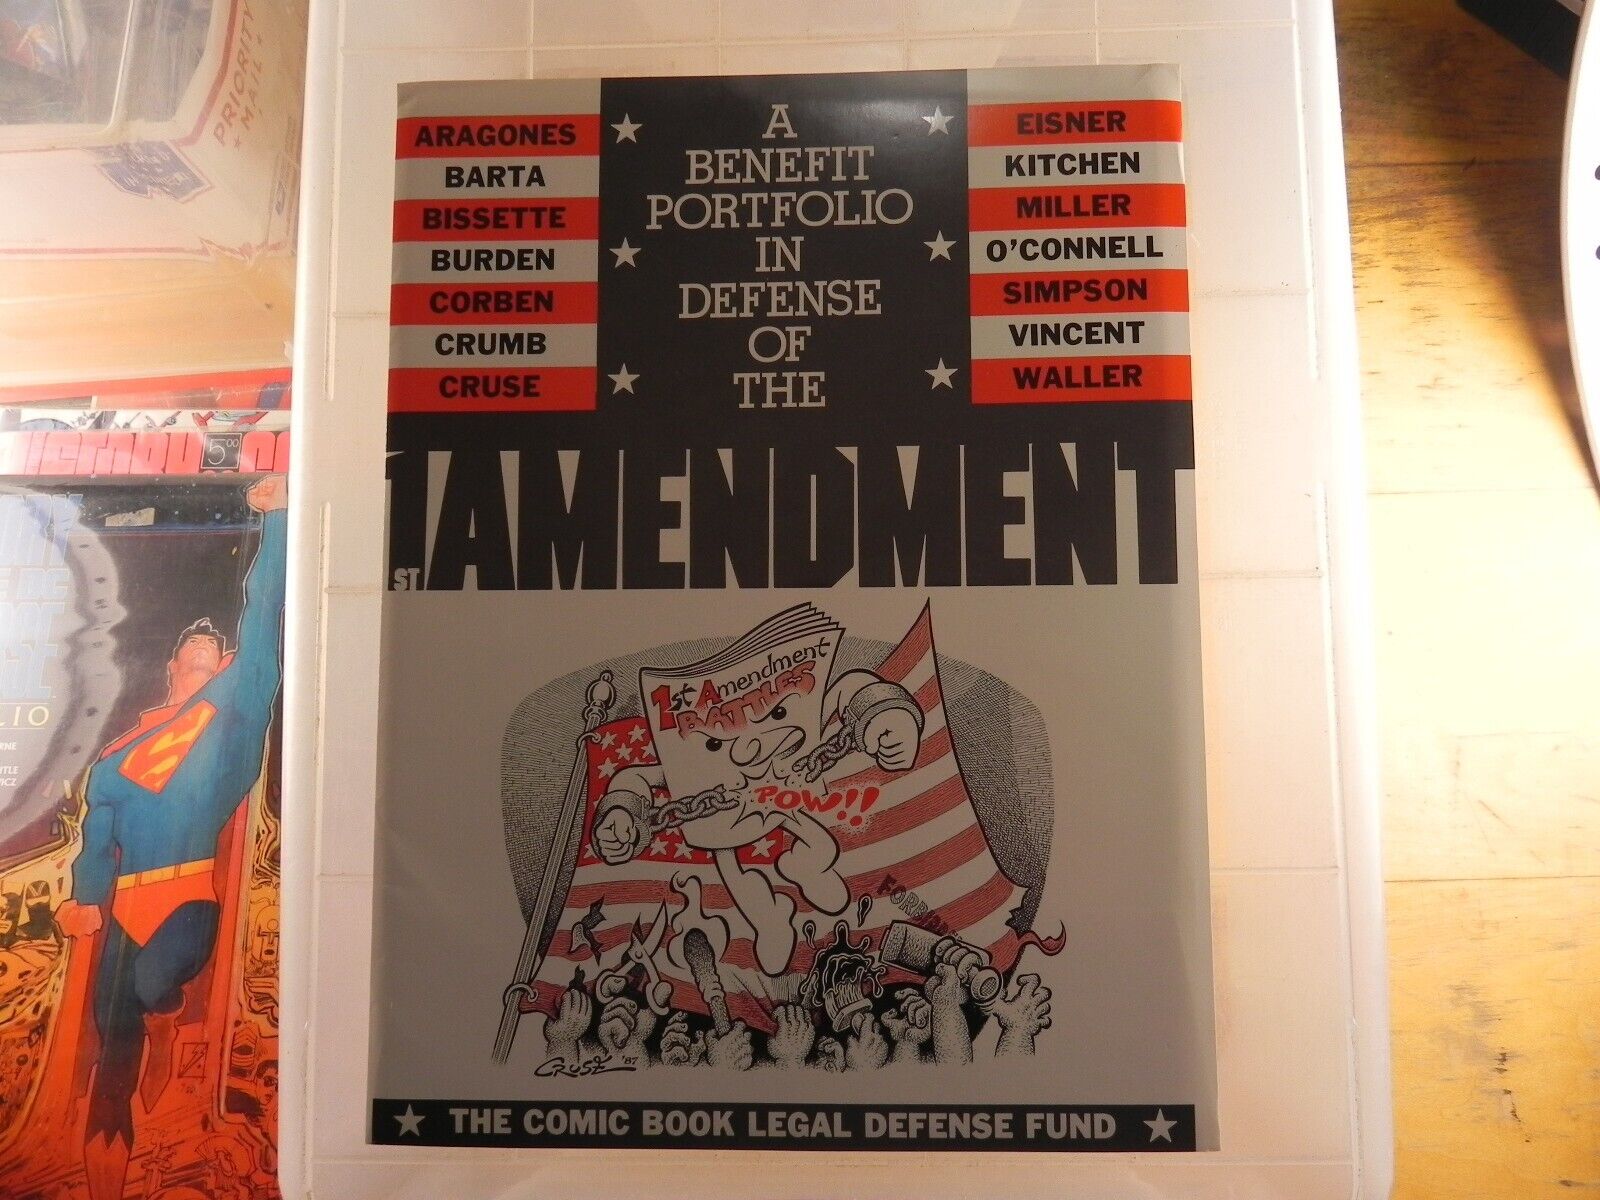 1987 Benefit Portfolio in Defense of the 1st Amendment numbered 399/1500